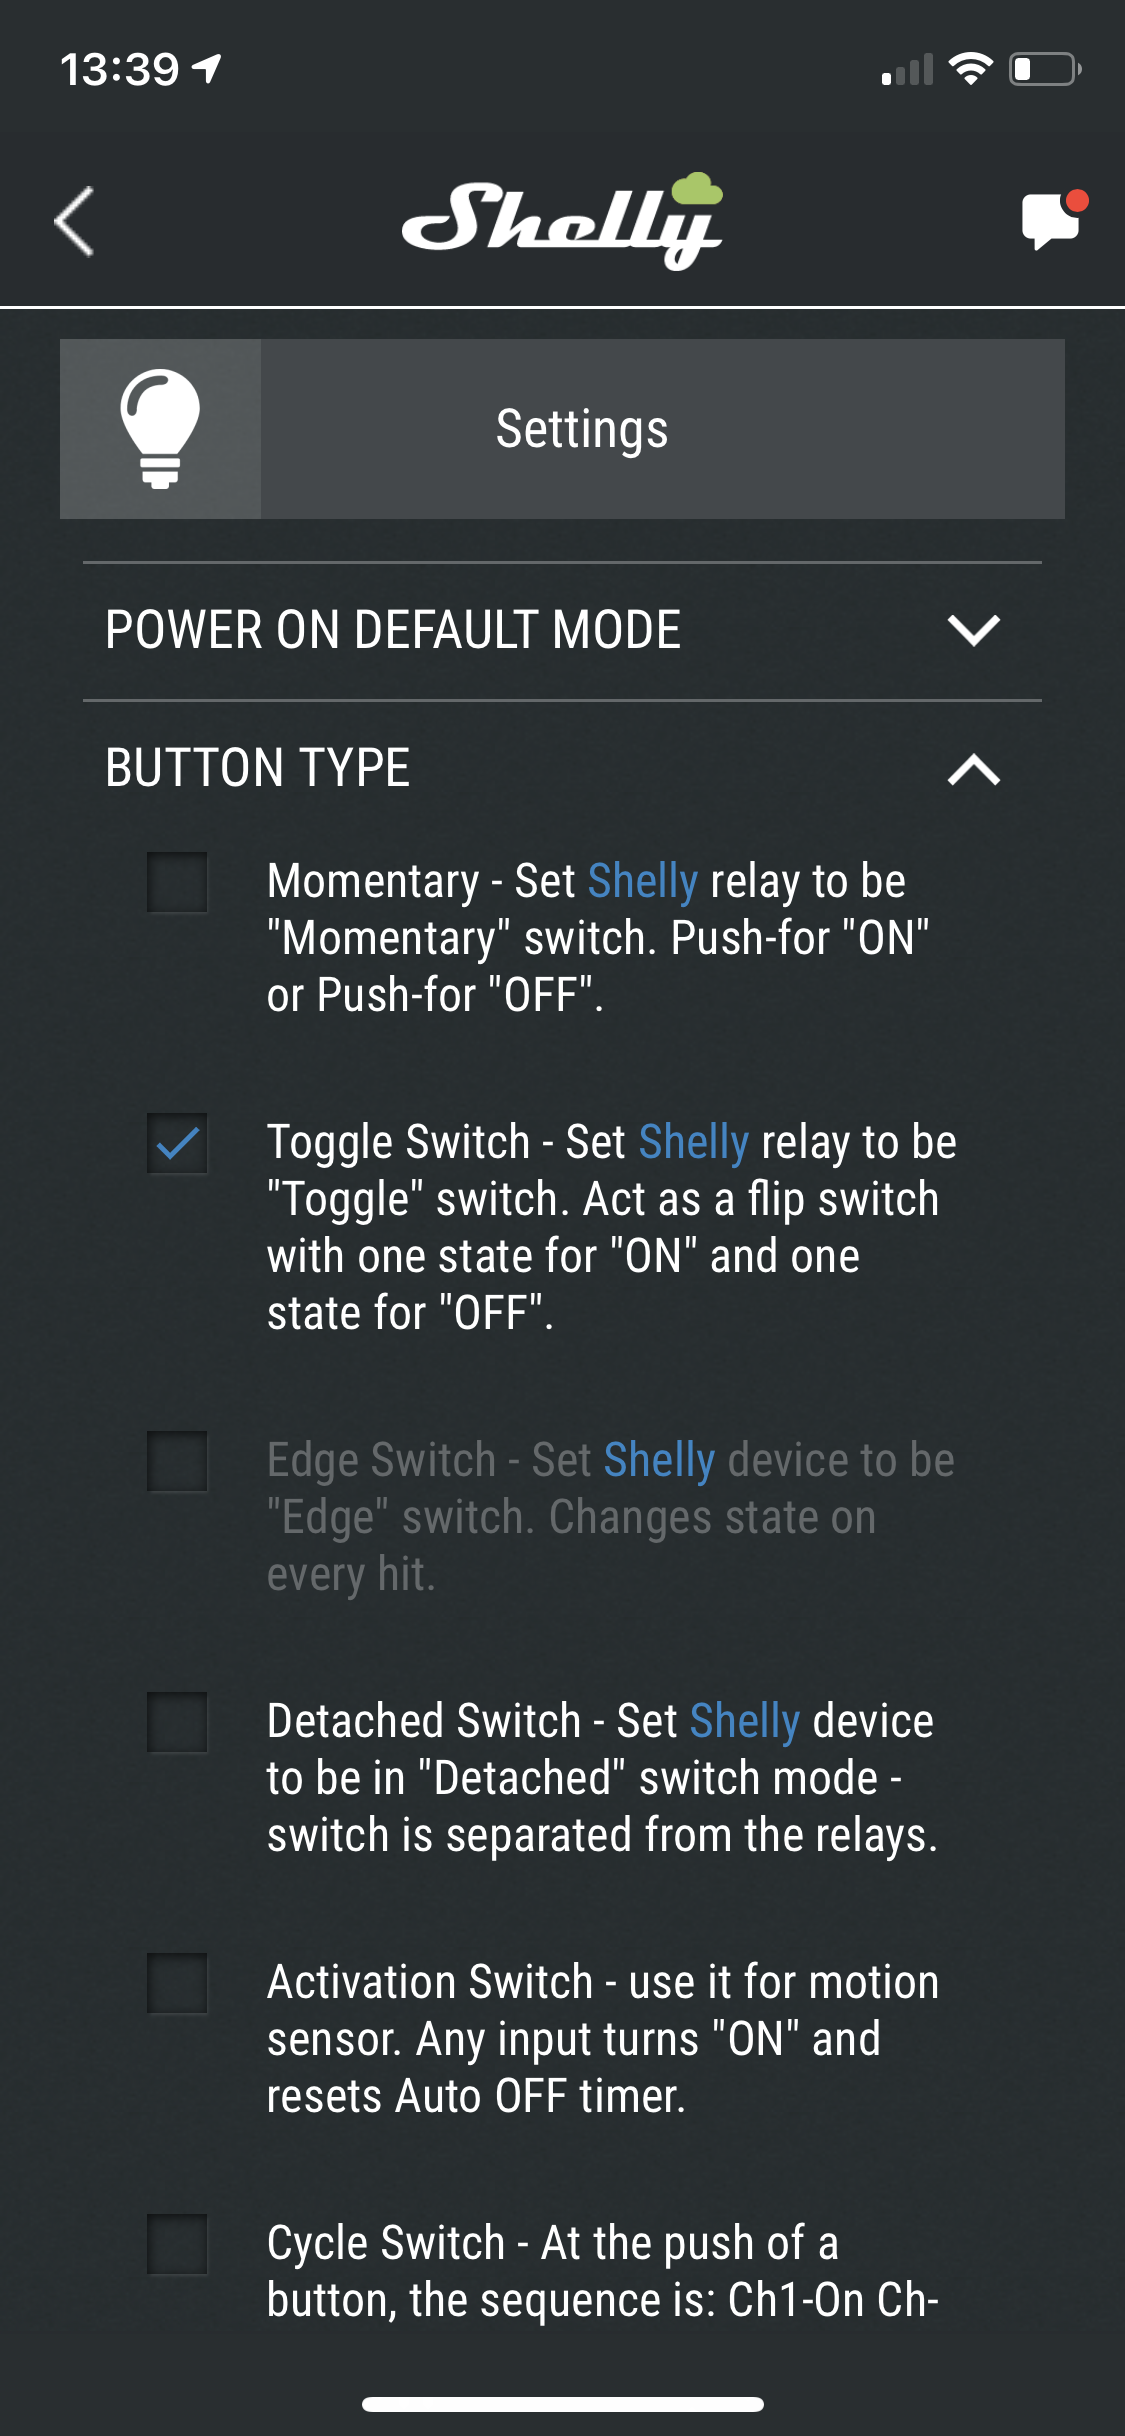 Edge Switch Mode is disabled